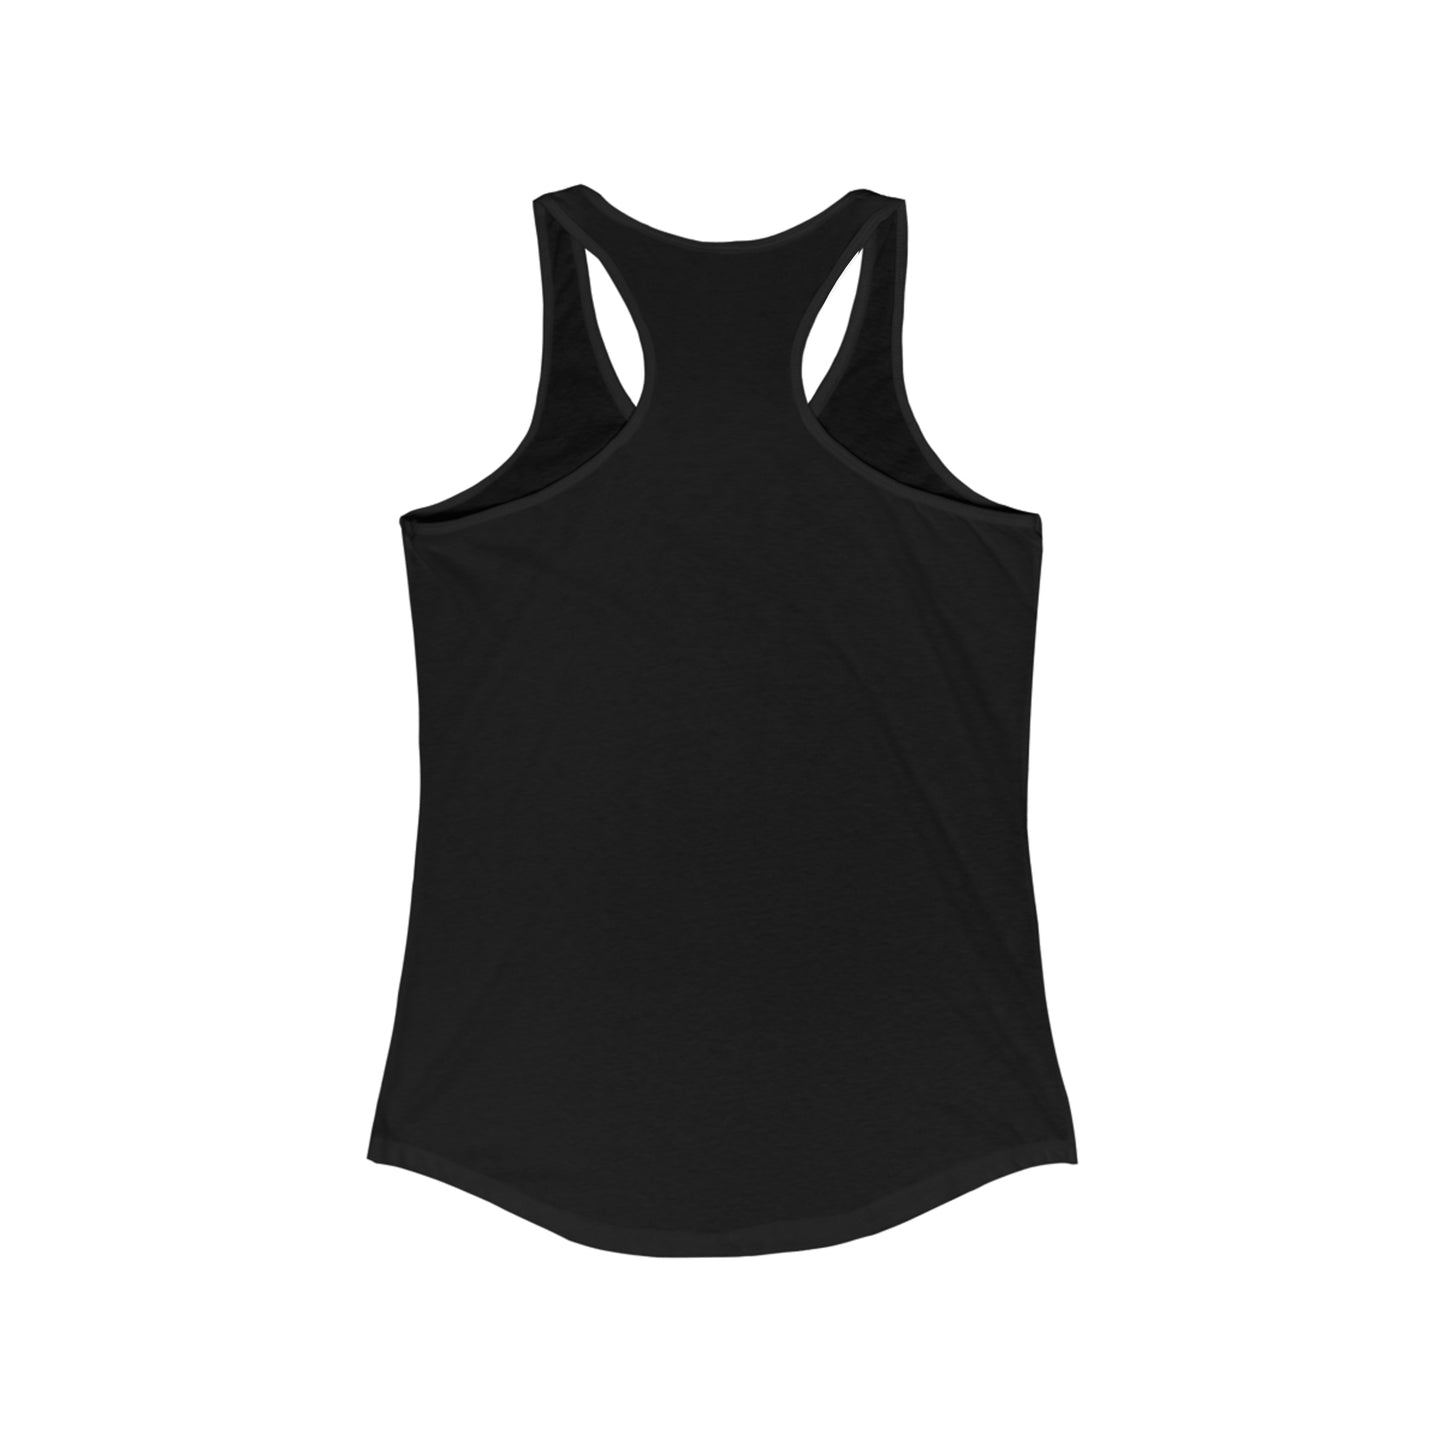 A plain black Printify Women's Logo Racerback Tank displayed against a white background, purchased in Toronto's Cabbagetown. The tank top has a relaxed fit and smooth fabric with no visible logos or designs.